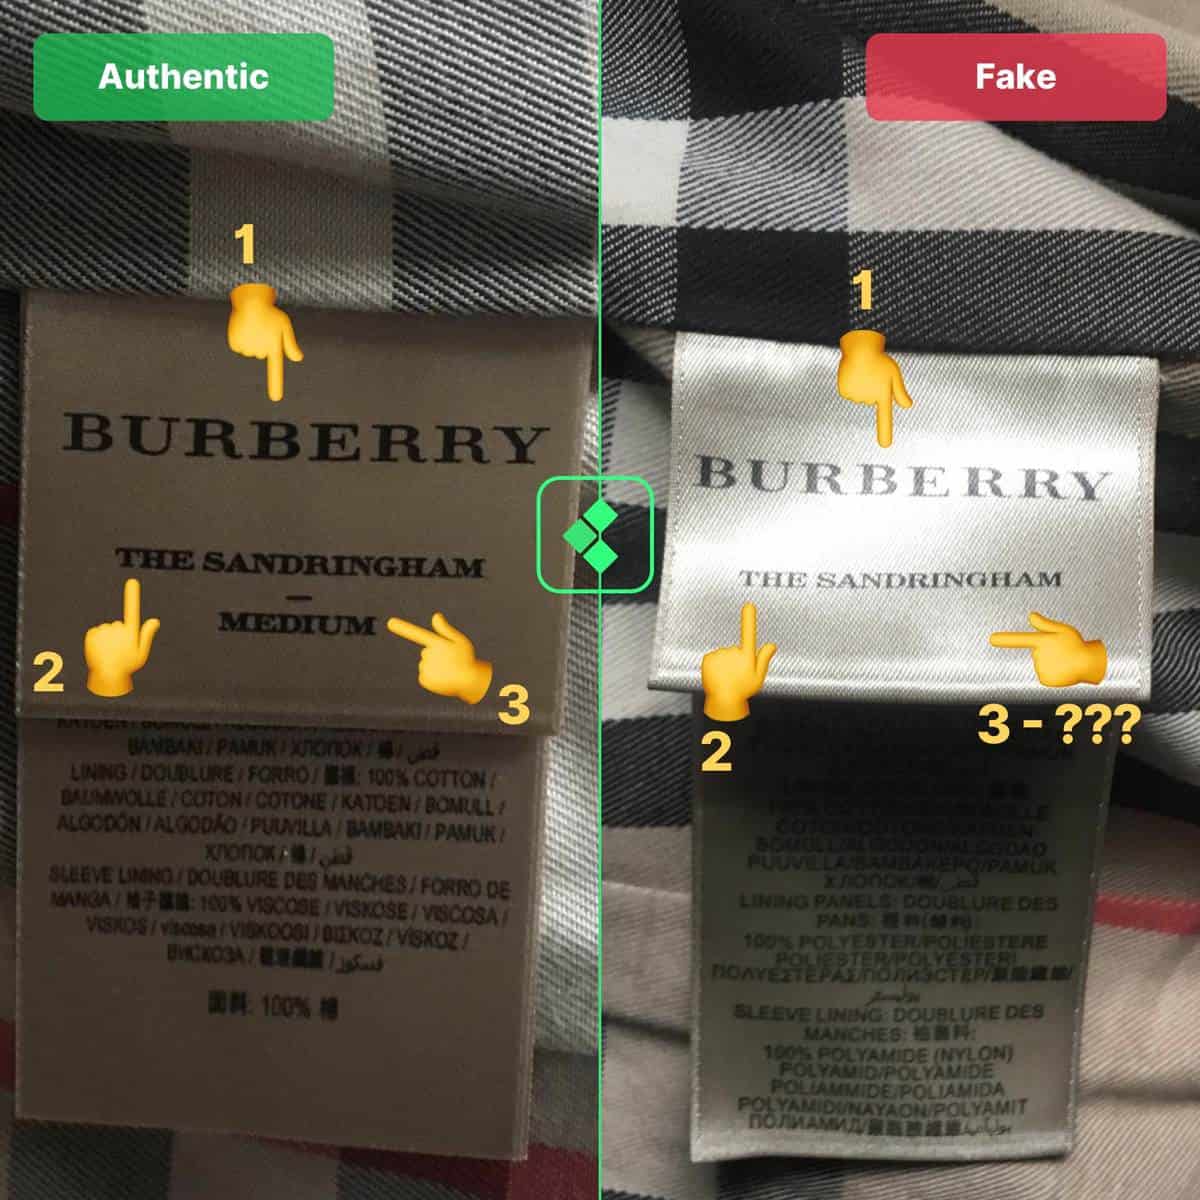 How To Spot Fake Burberry Coats In 2021 - Fake Vs Real Burberry 